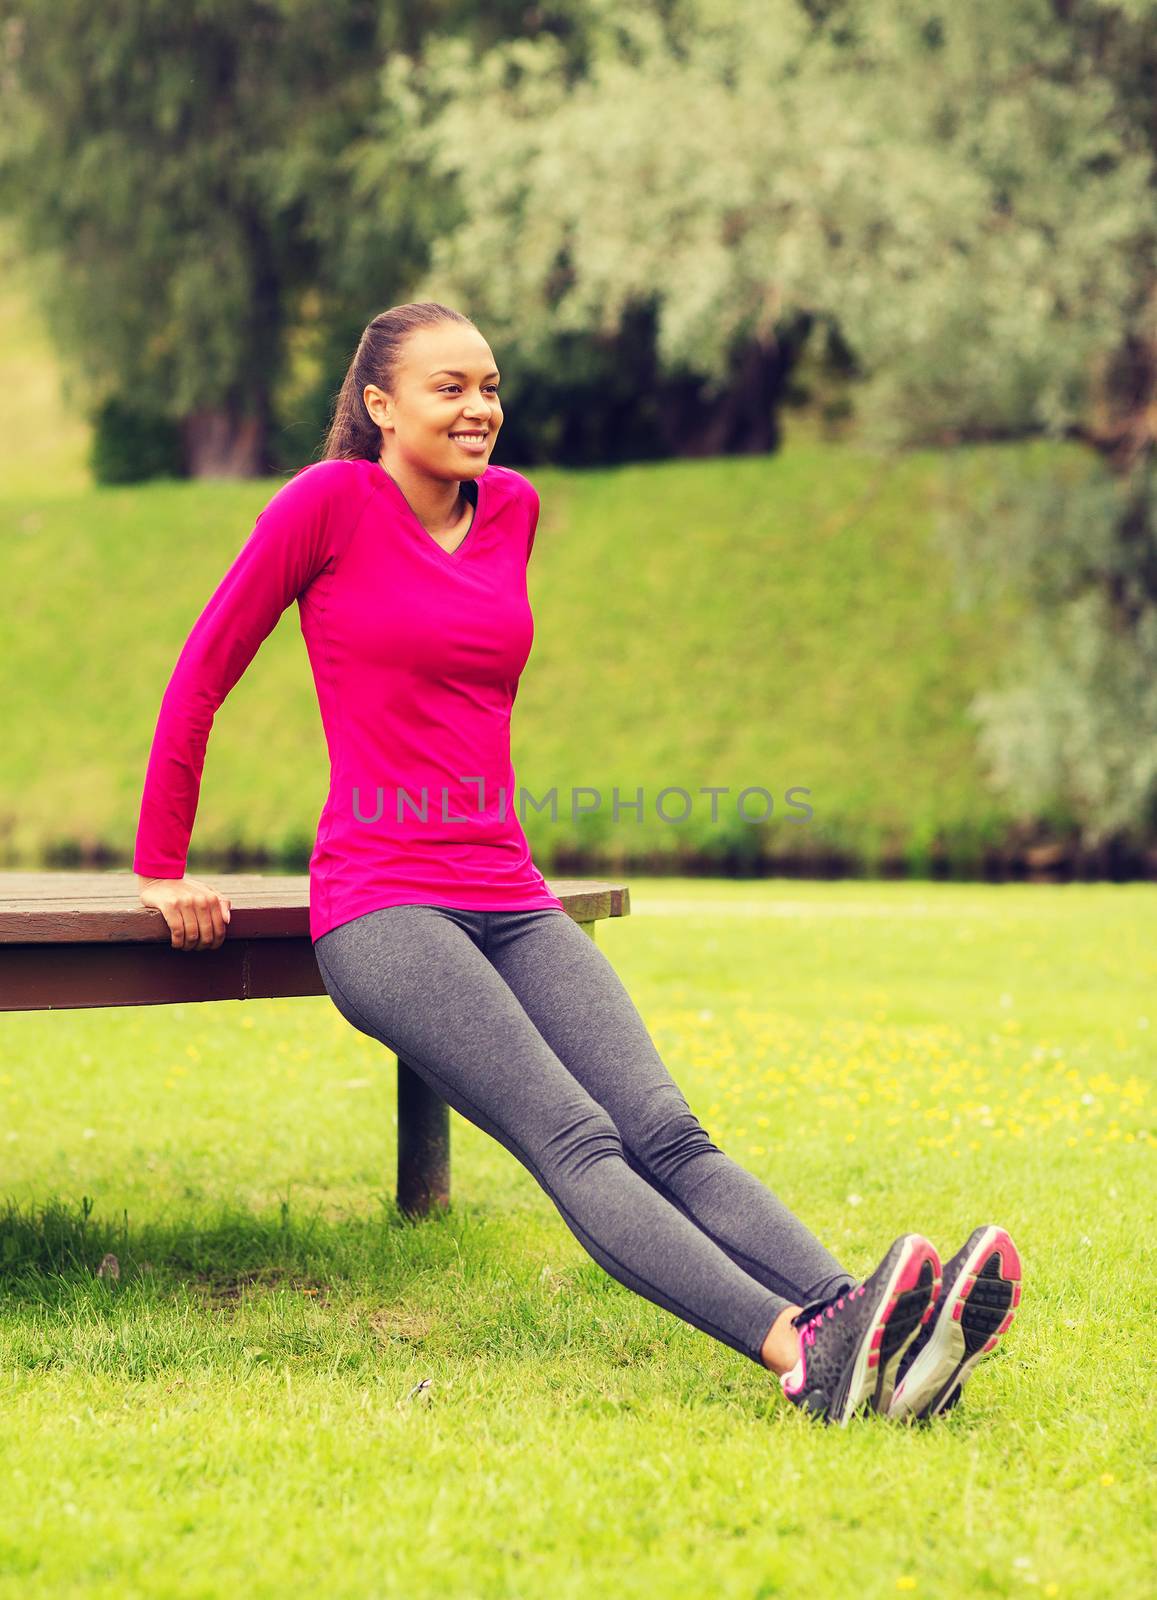 fitness, sport, training, park and lifestyle concept - smiling african american woman doing push-ups on bench outdoors